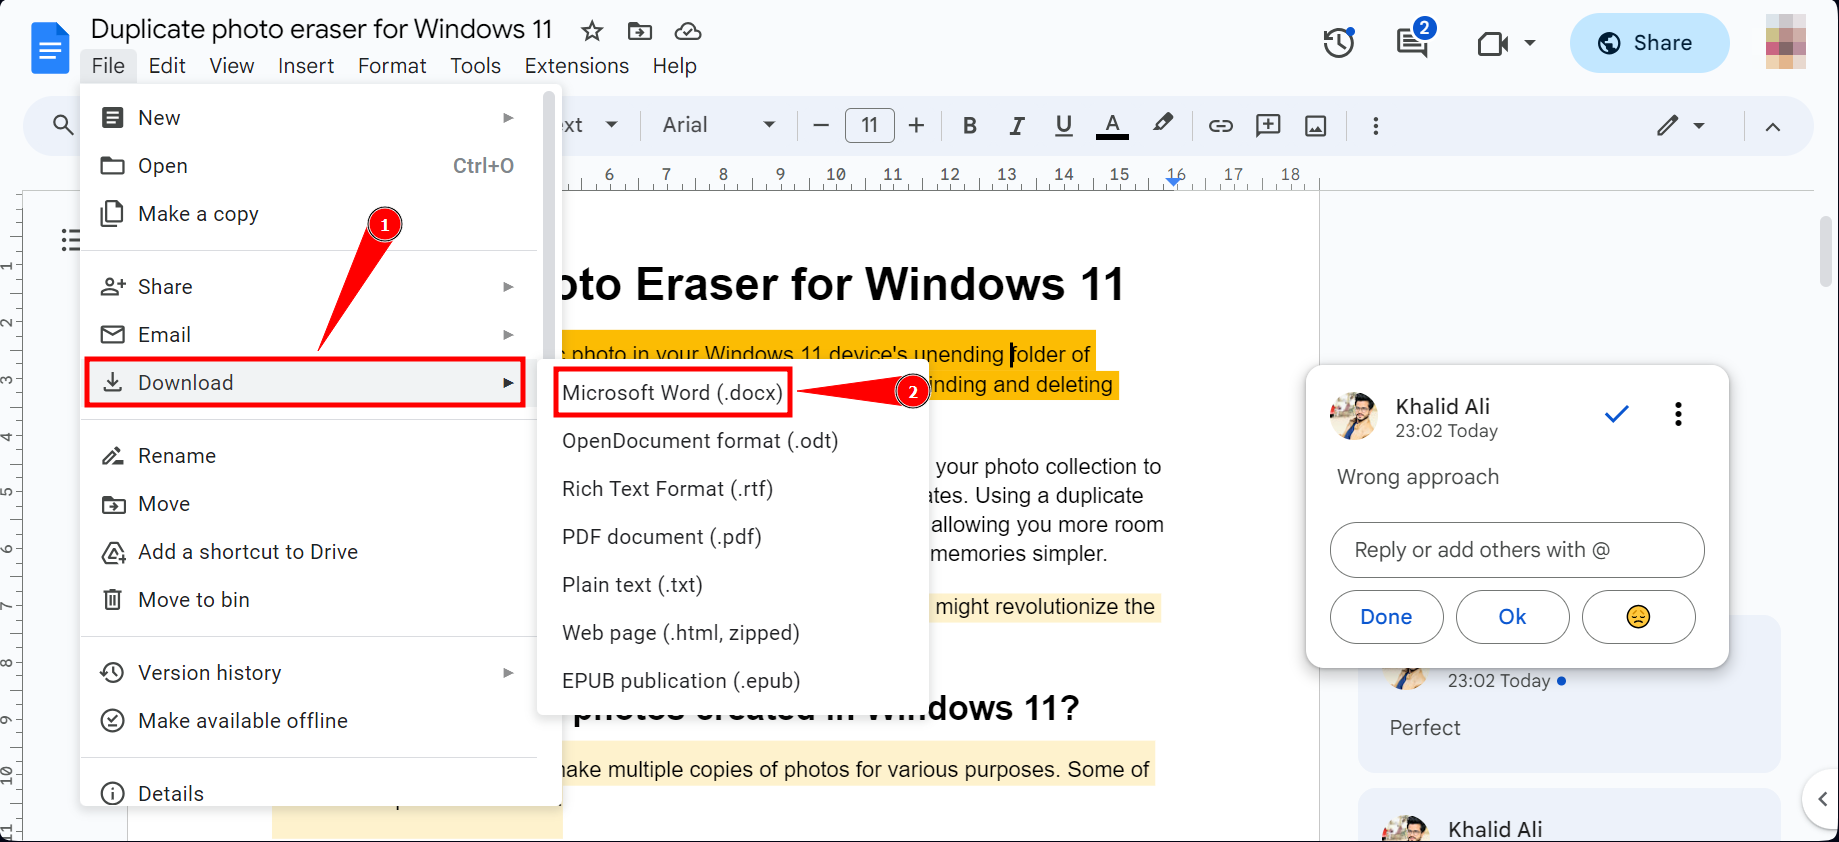 Click Download then select Microsoft Word